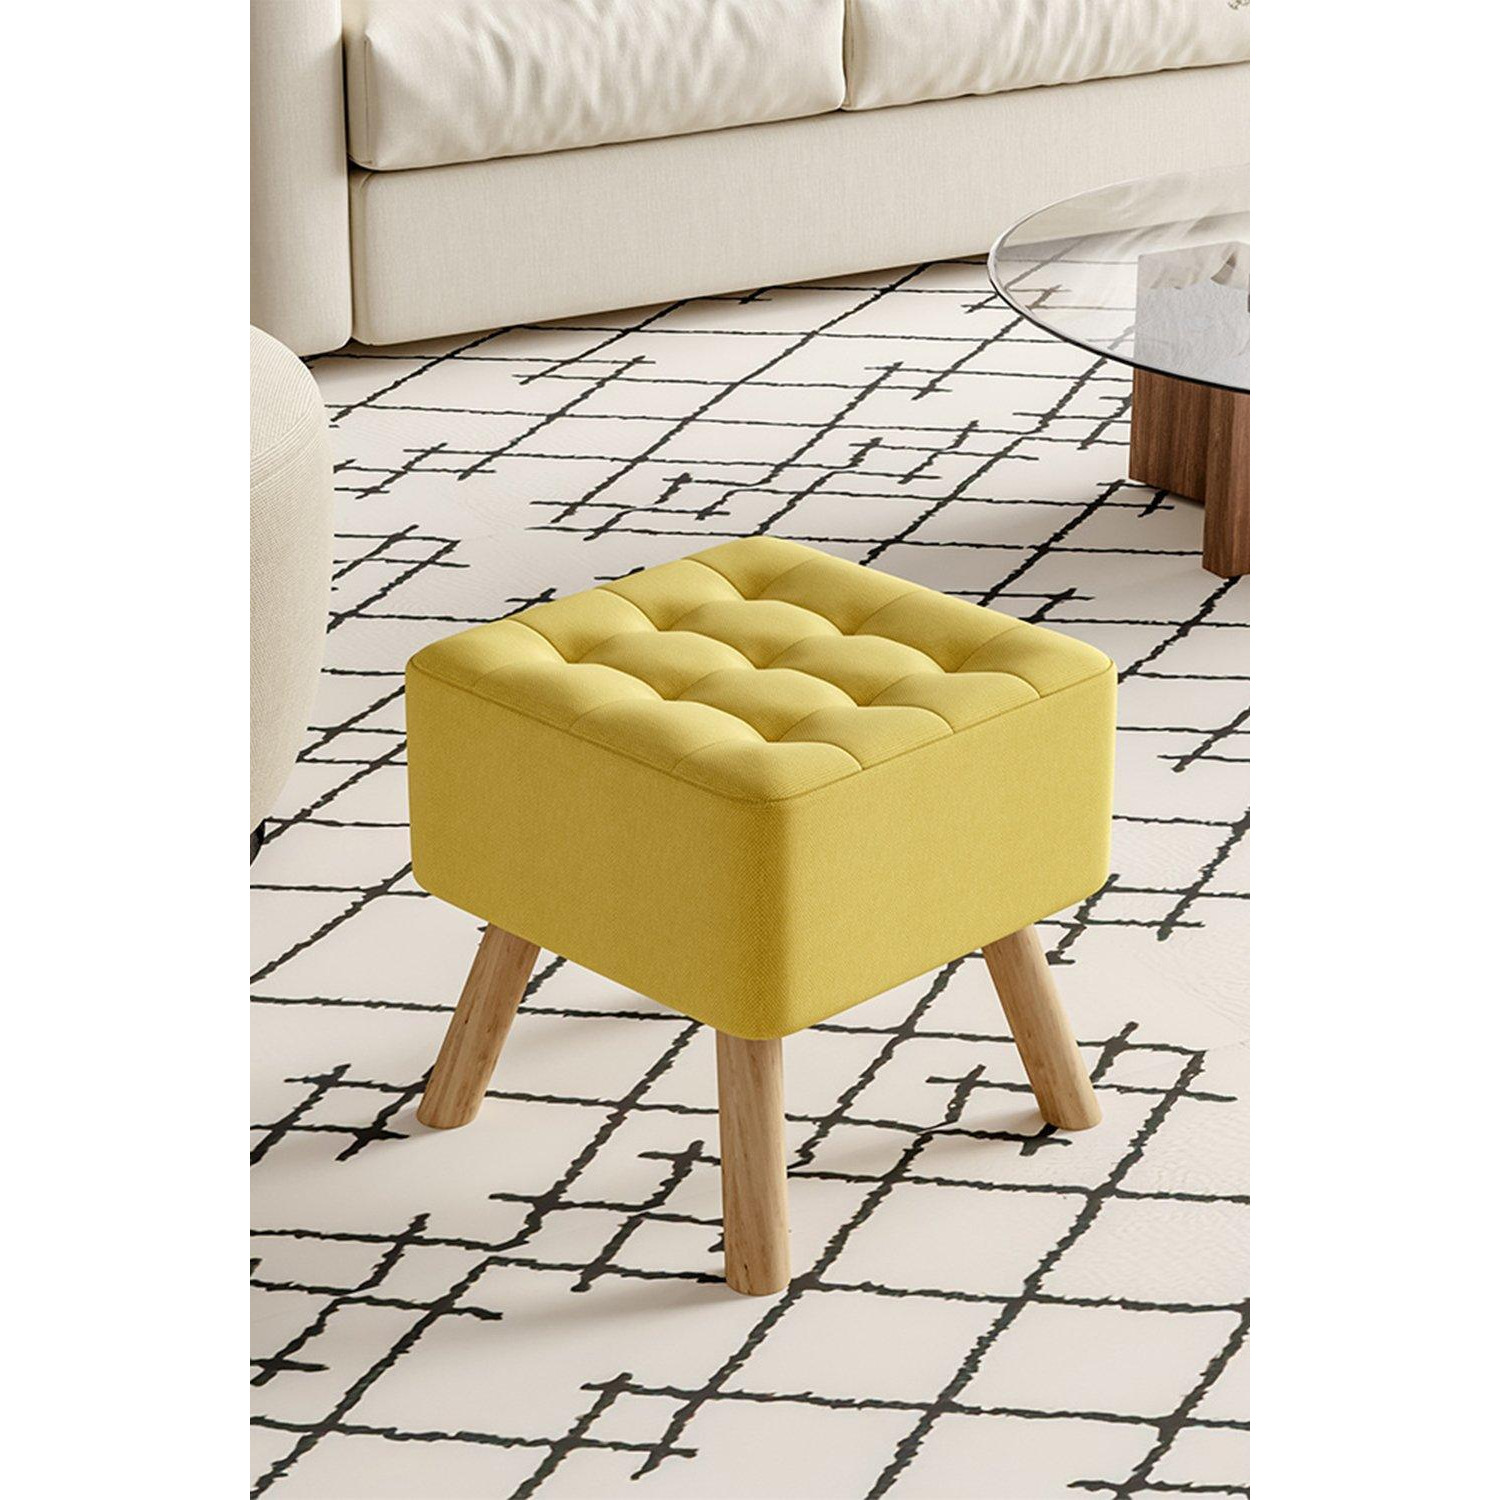 Bright Yellow Linen Padded Wooden Leg Square Footstool - image 1